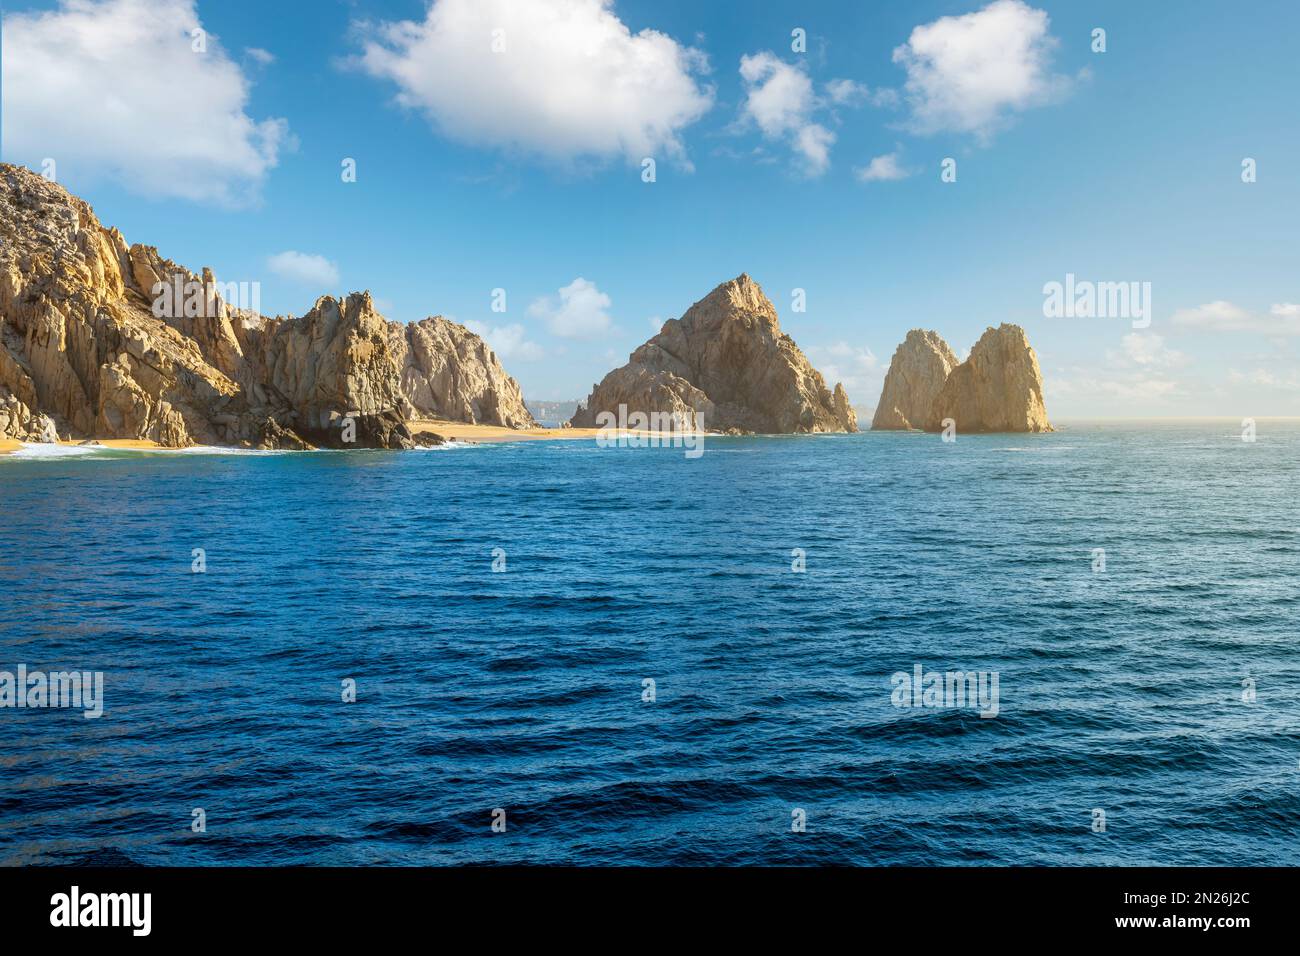 Sea view as sunlight hits the sandy Playa de Los Amantas, known as Lover's Beach at the Land's End Los Arcos rock formation at Cabo San Lucas, Mexico Stock Photo